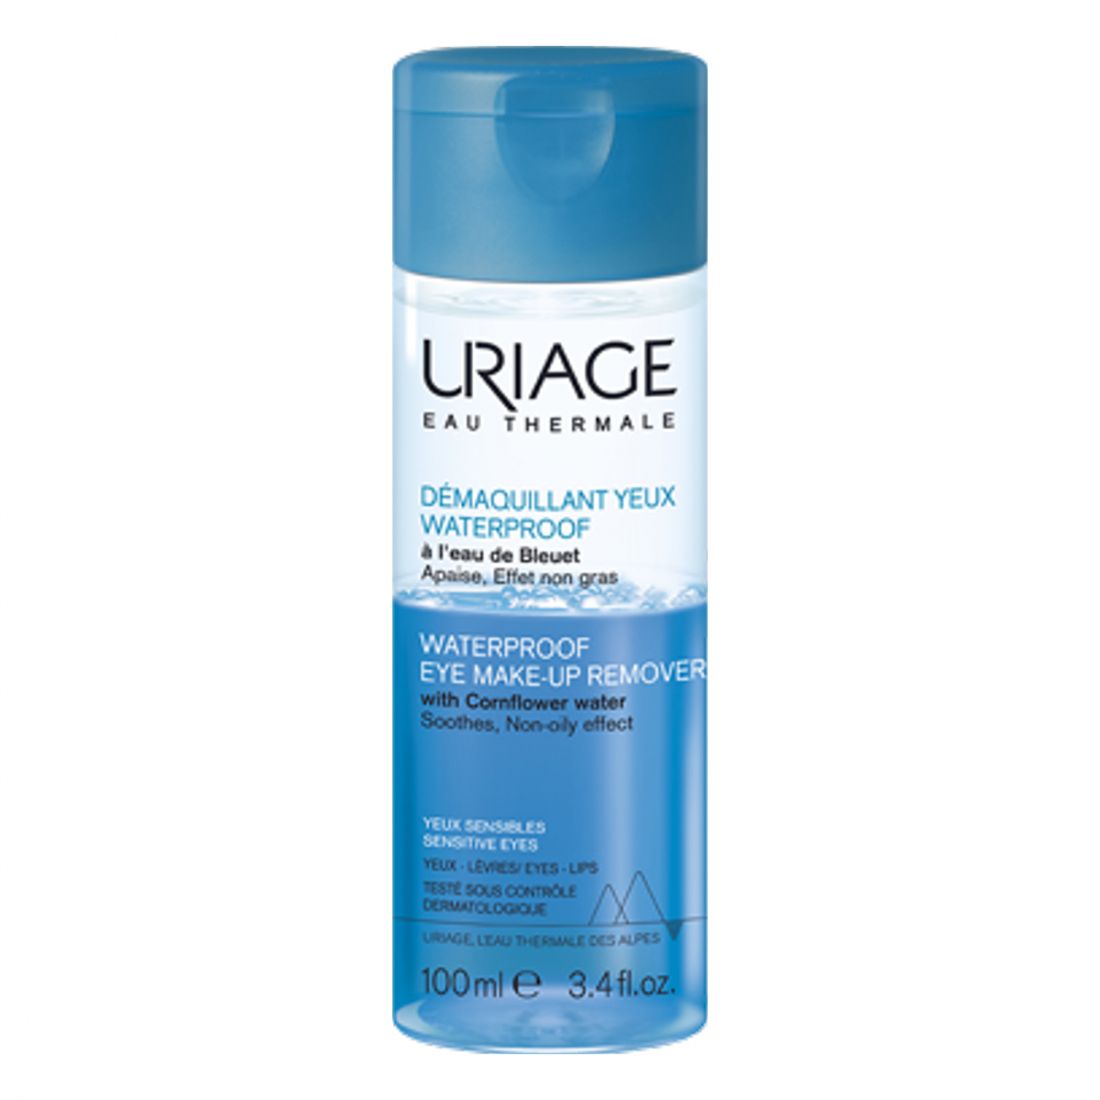 Uriage - Démaquillant Yeux Waterproof - 100 ml